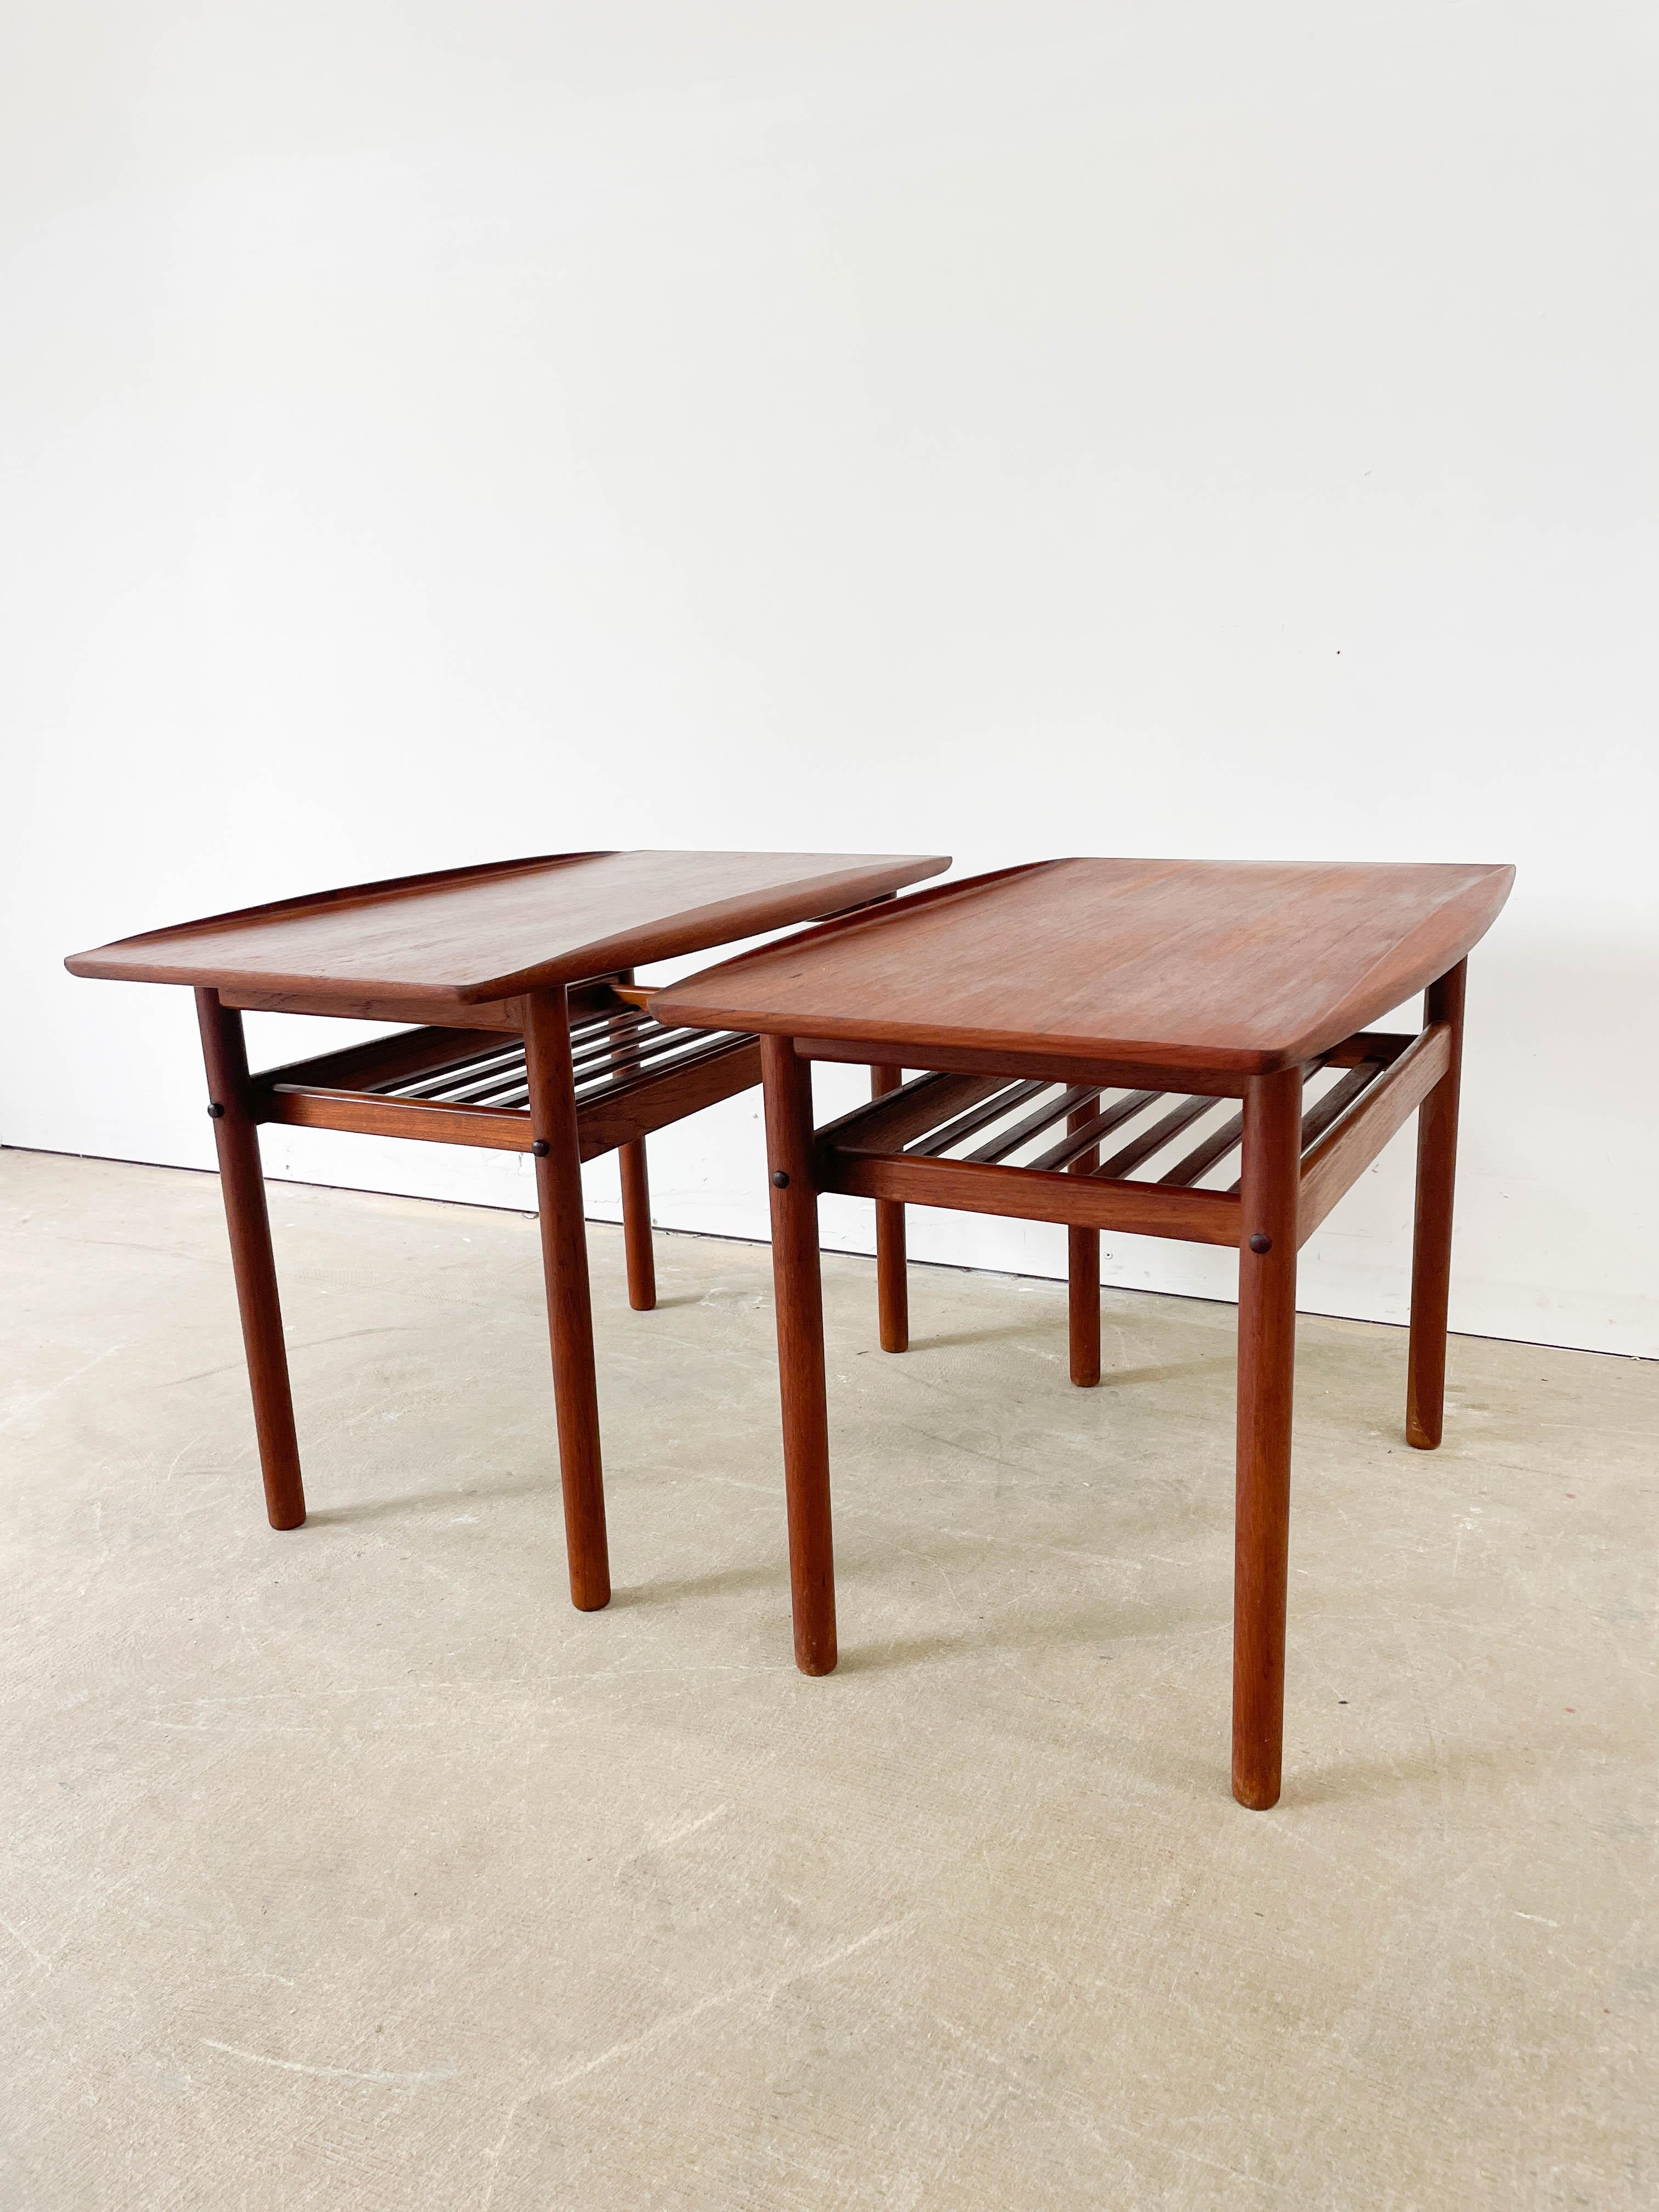 A pair of teak side tables designed by Grete Jalk and made by P. Jeppesen in Denmark in the 1950s. Beautiful teak tops with sculpted edges that resemble breaking waves and a useful slatted shelf beneath. Both tables have the Danish Furniture Maker's